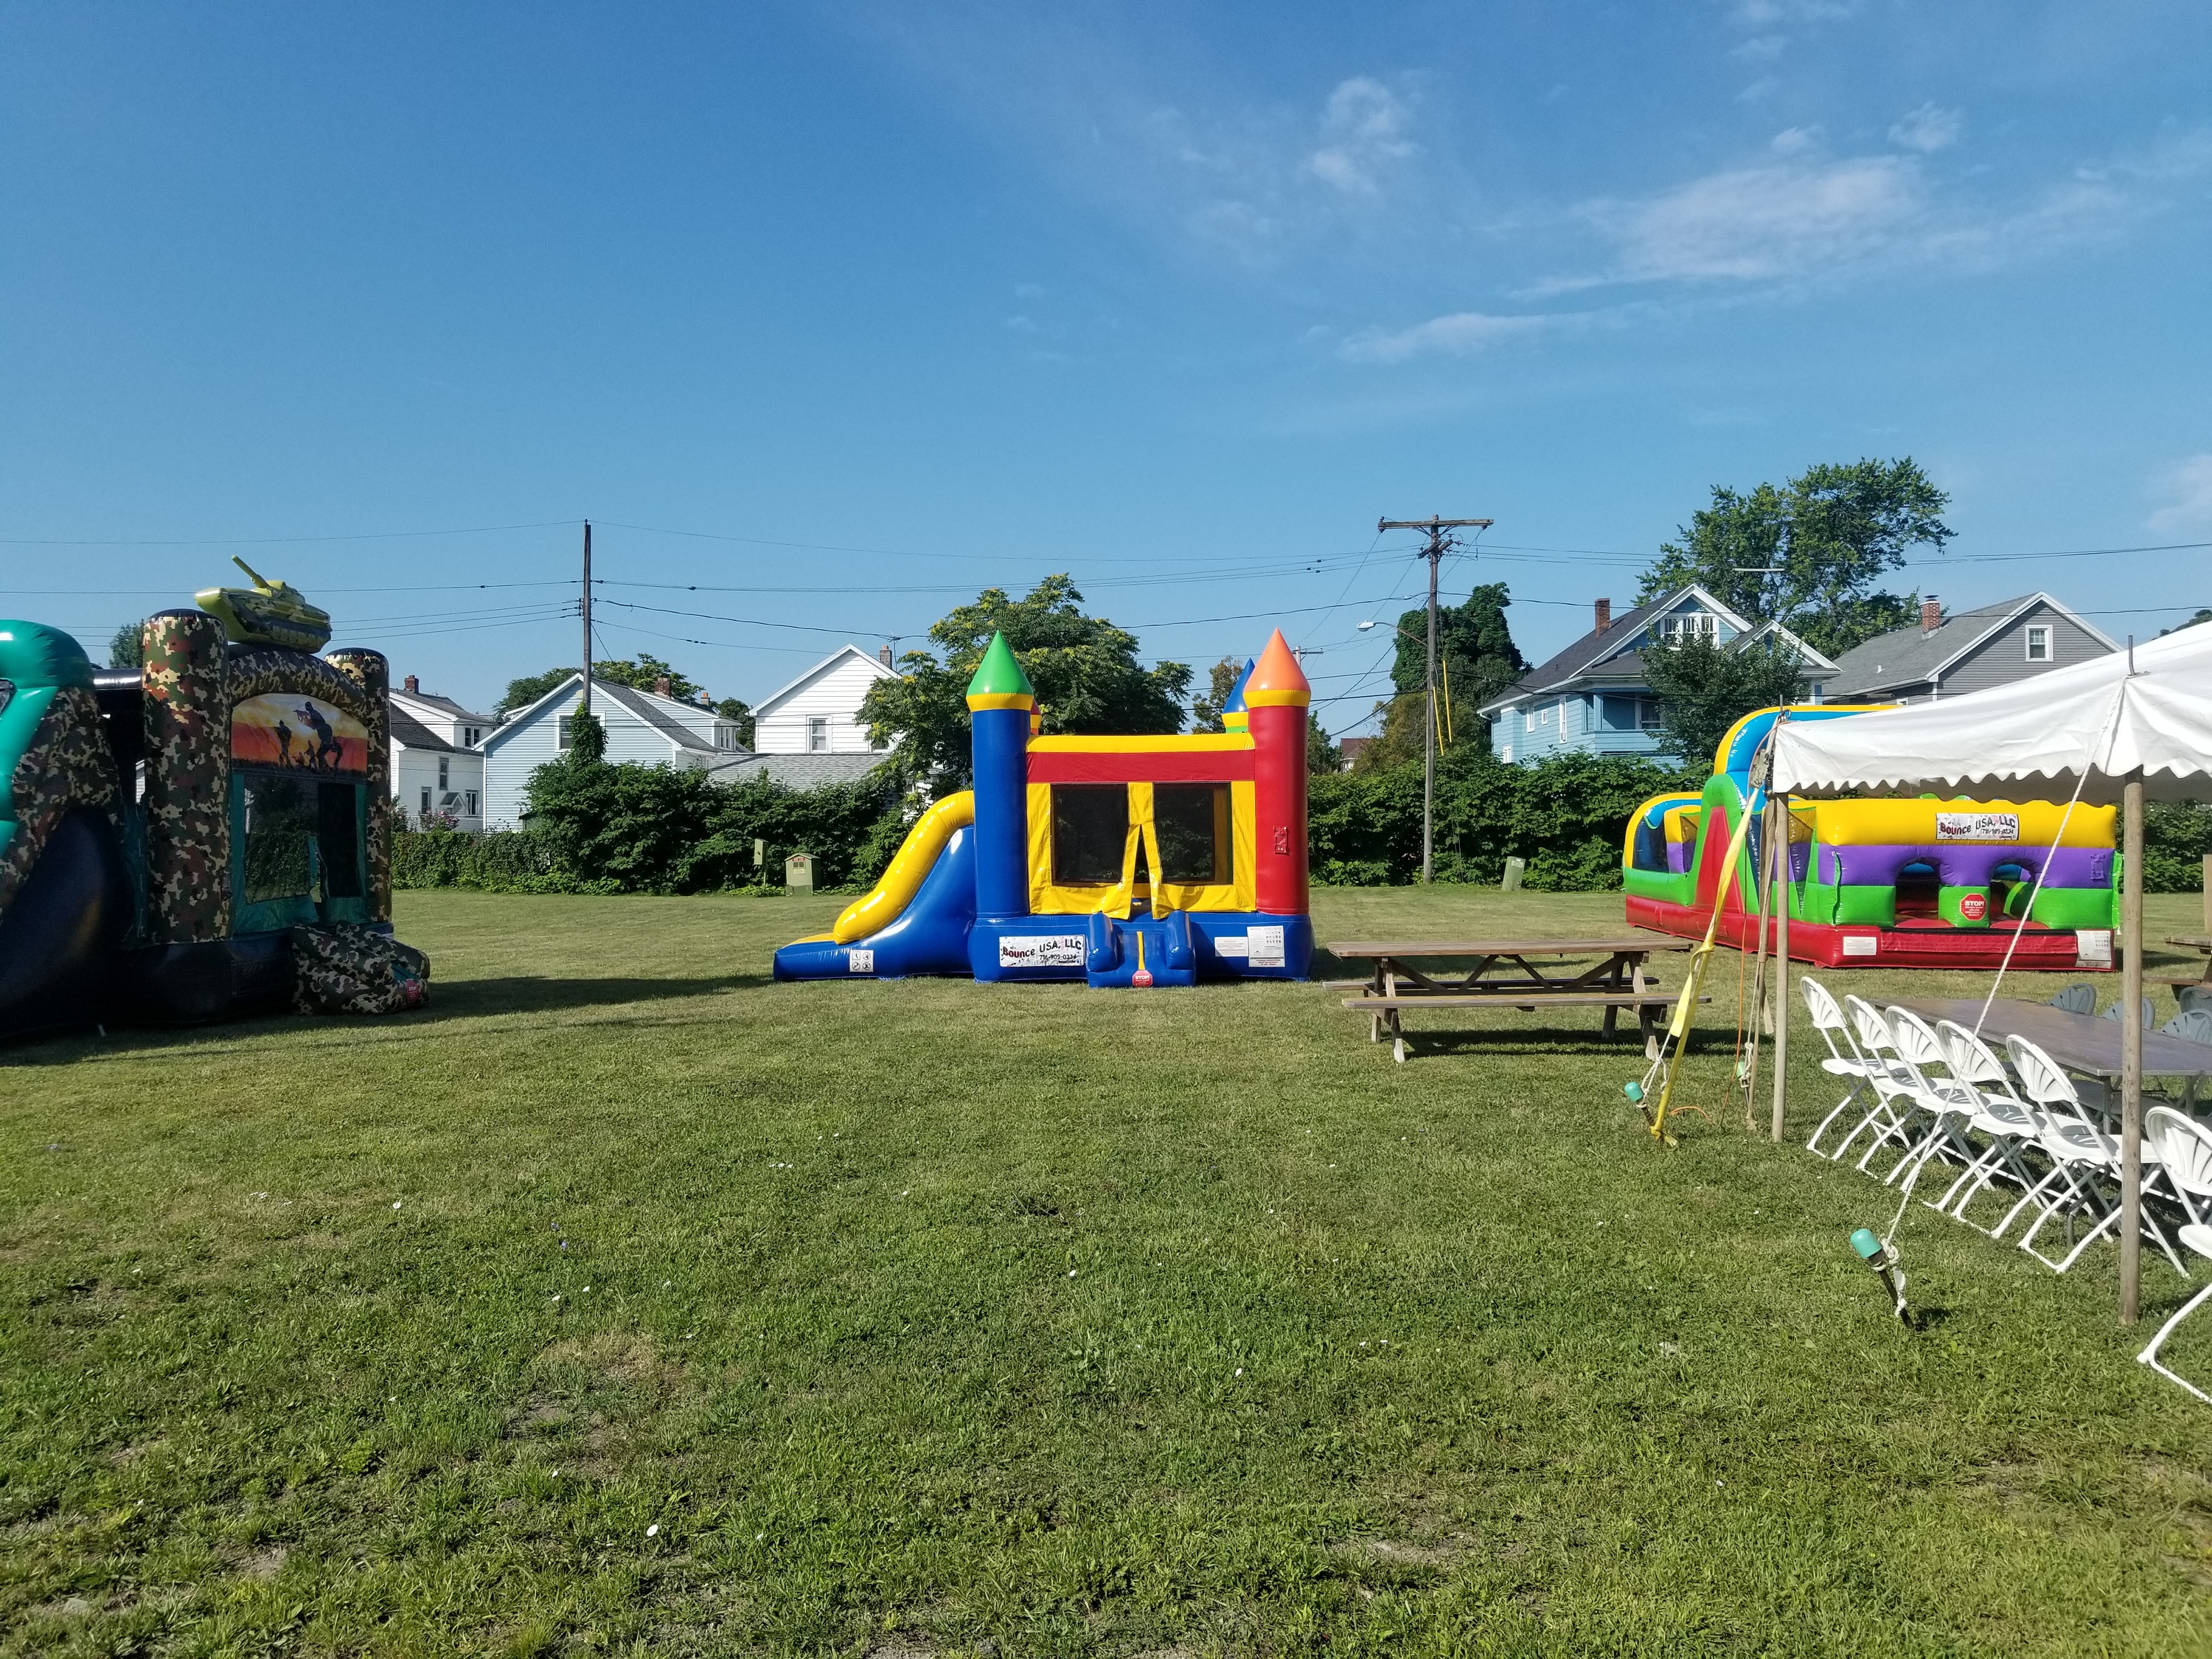 2 bounce houses with slides and an obstacle course rented for a baseball league party